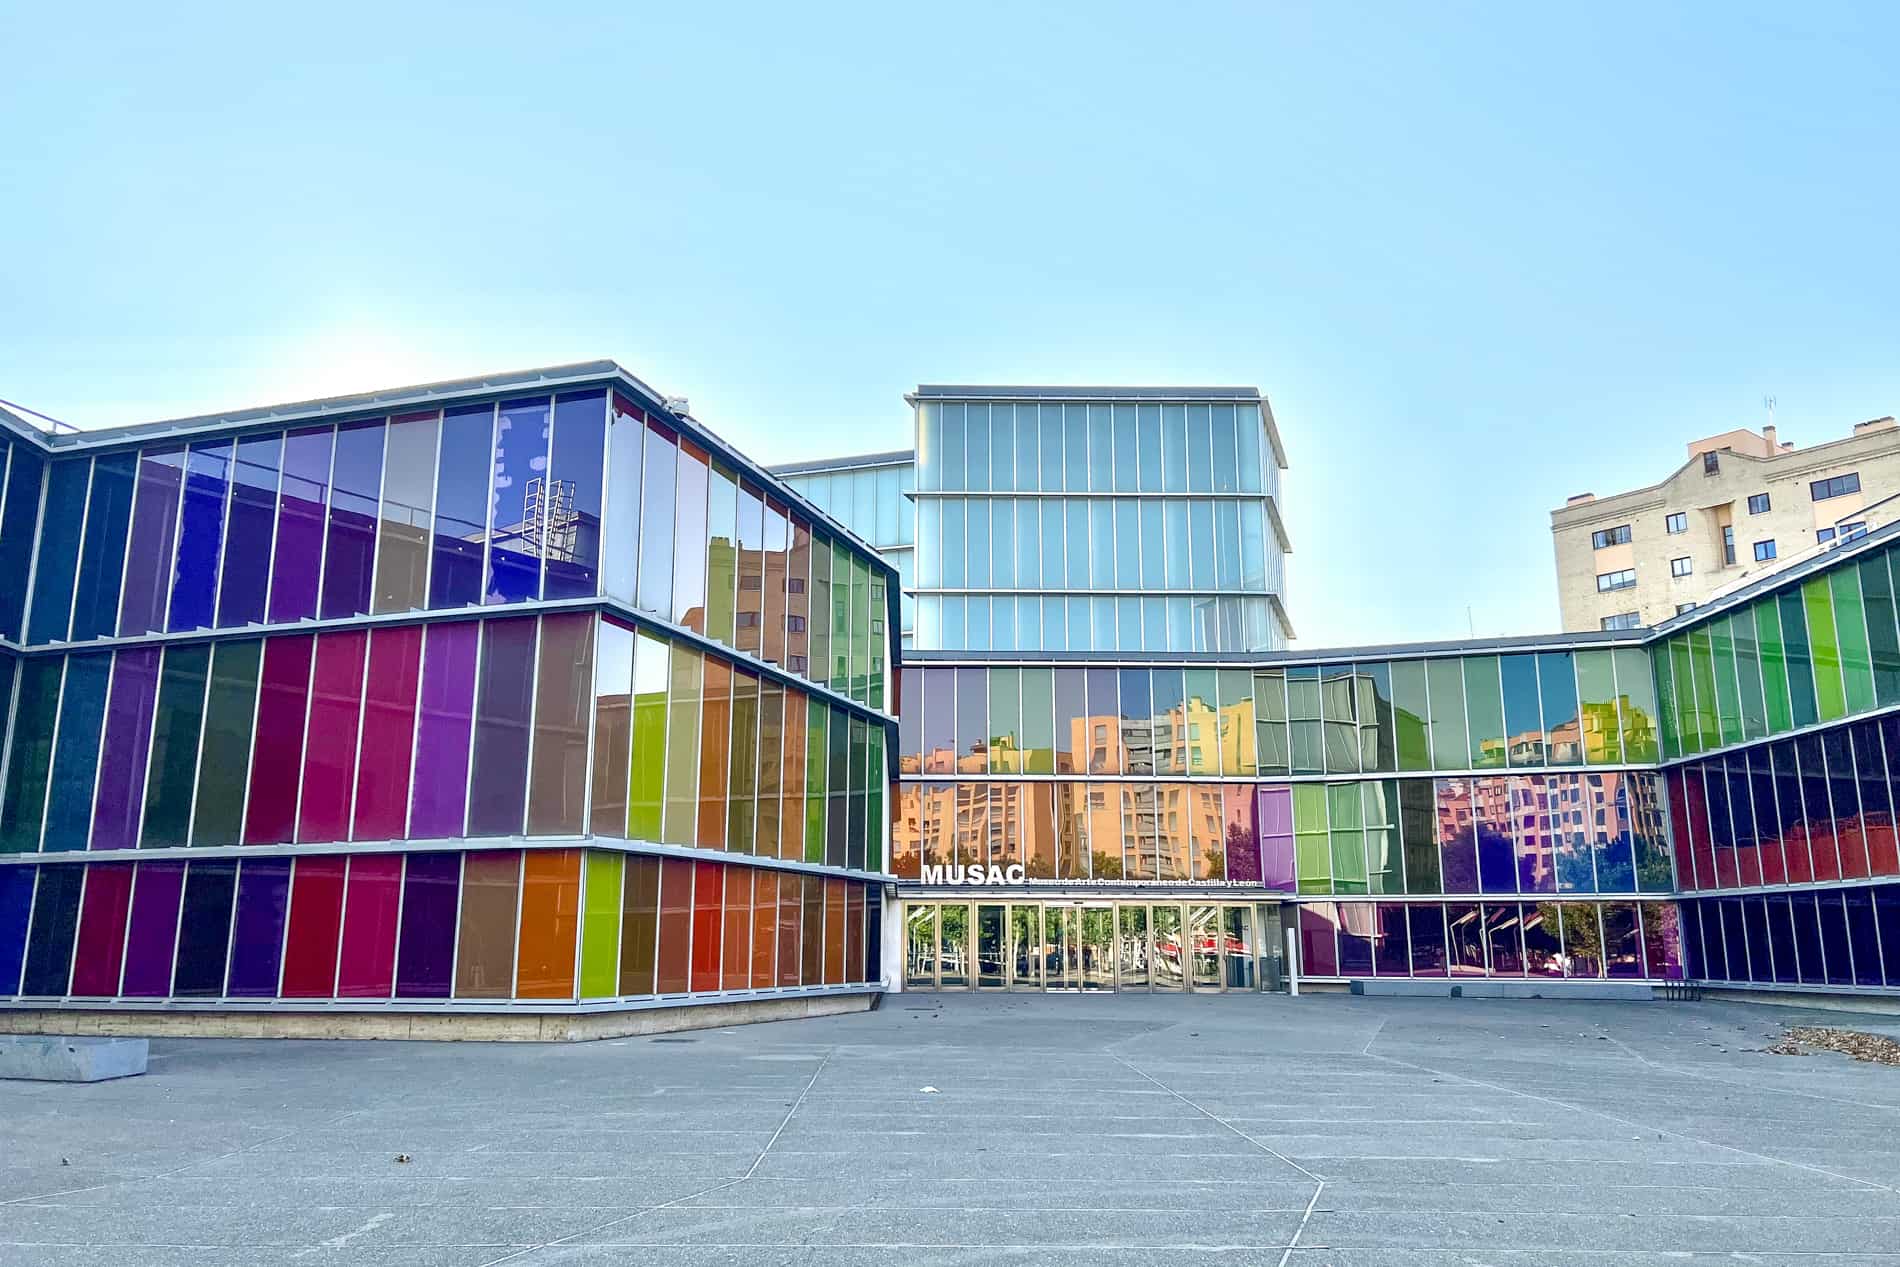 The multi-coloured glass panelled facade of the Contemporary Art Museum (MUSAC) in León.